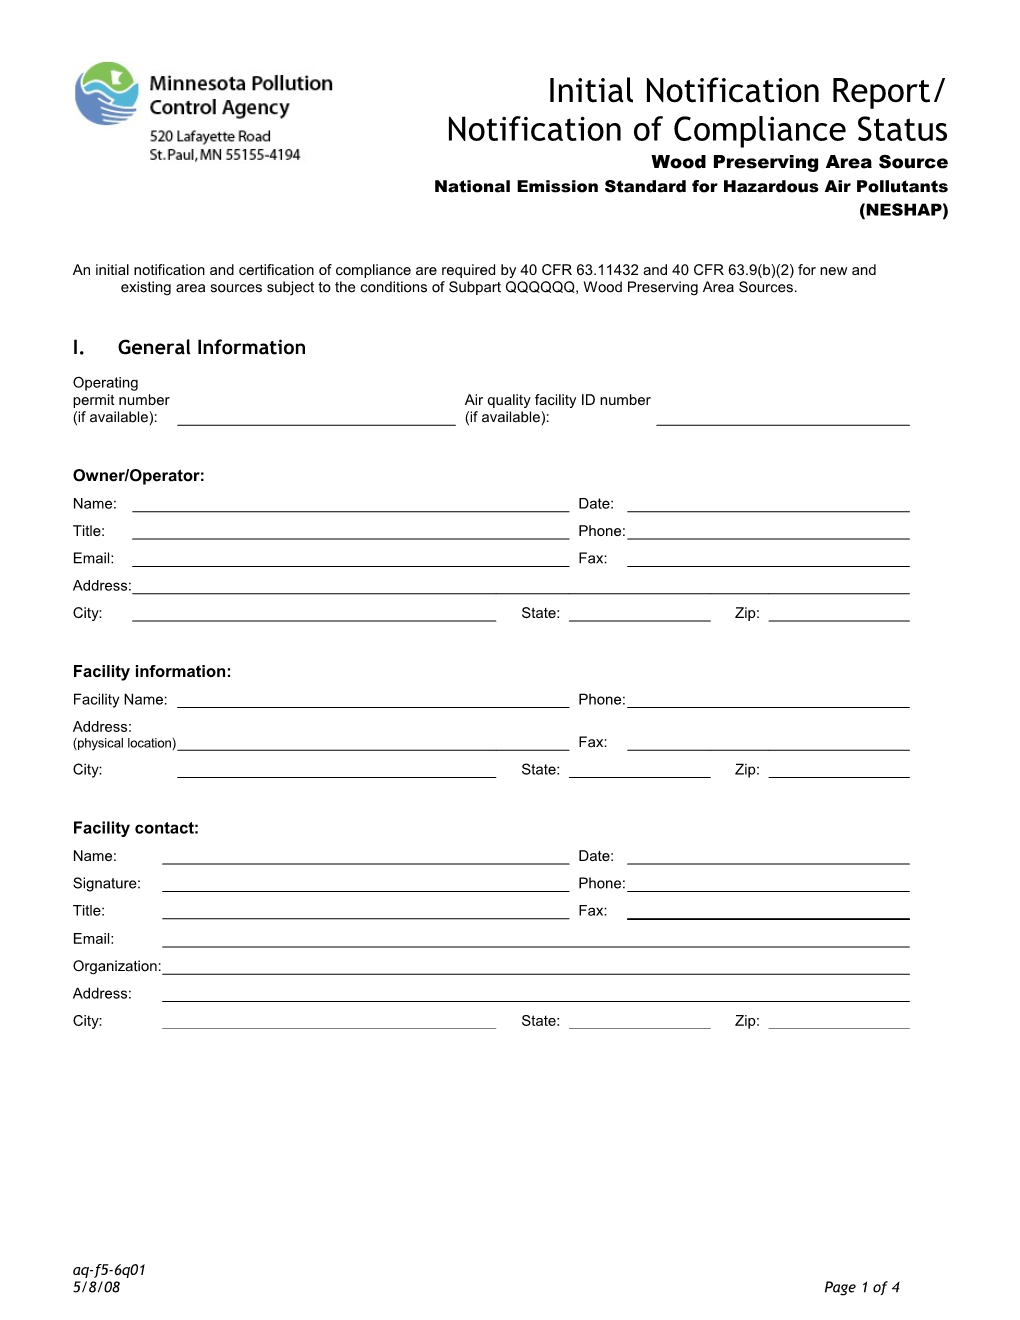 Initial Notification Report Form